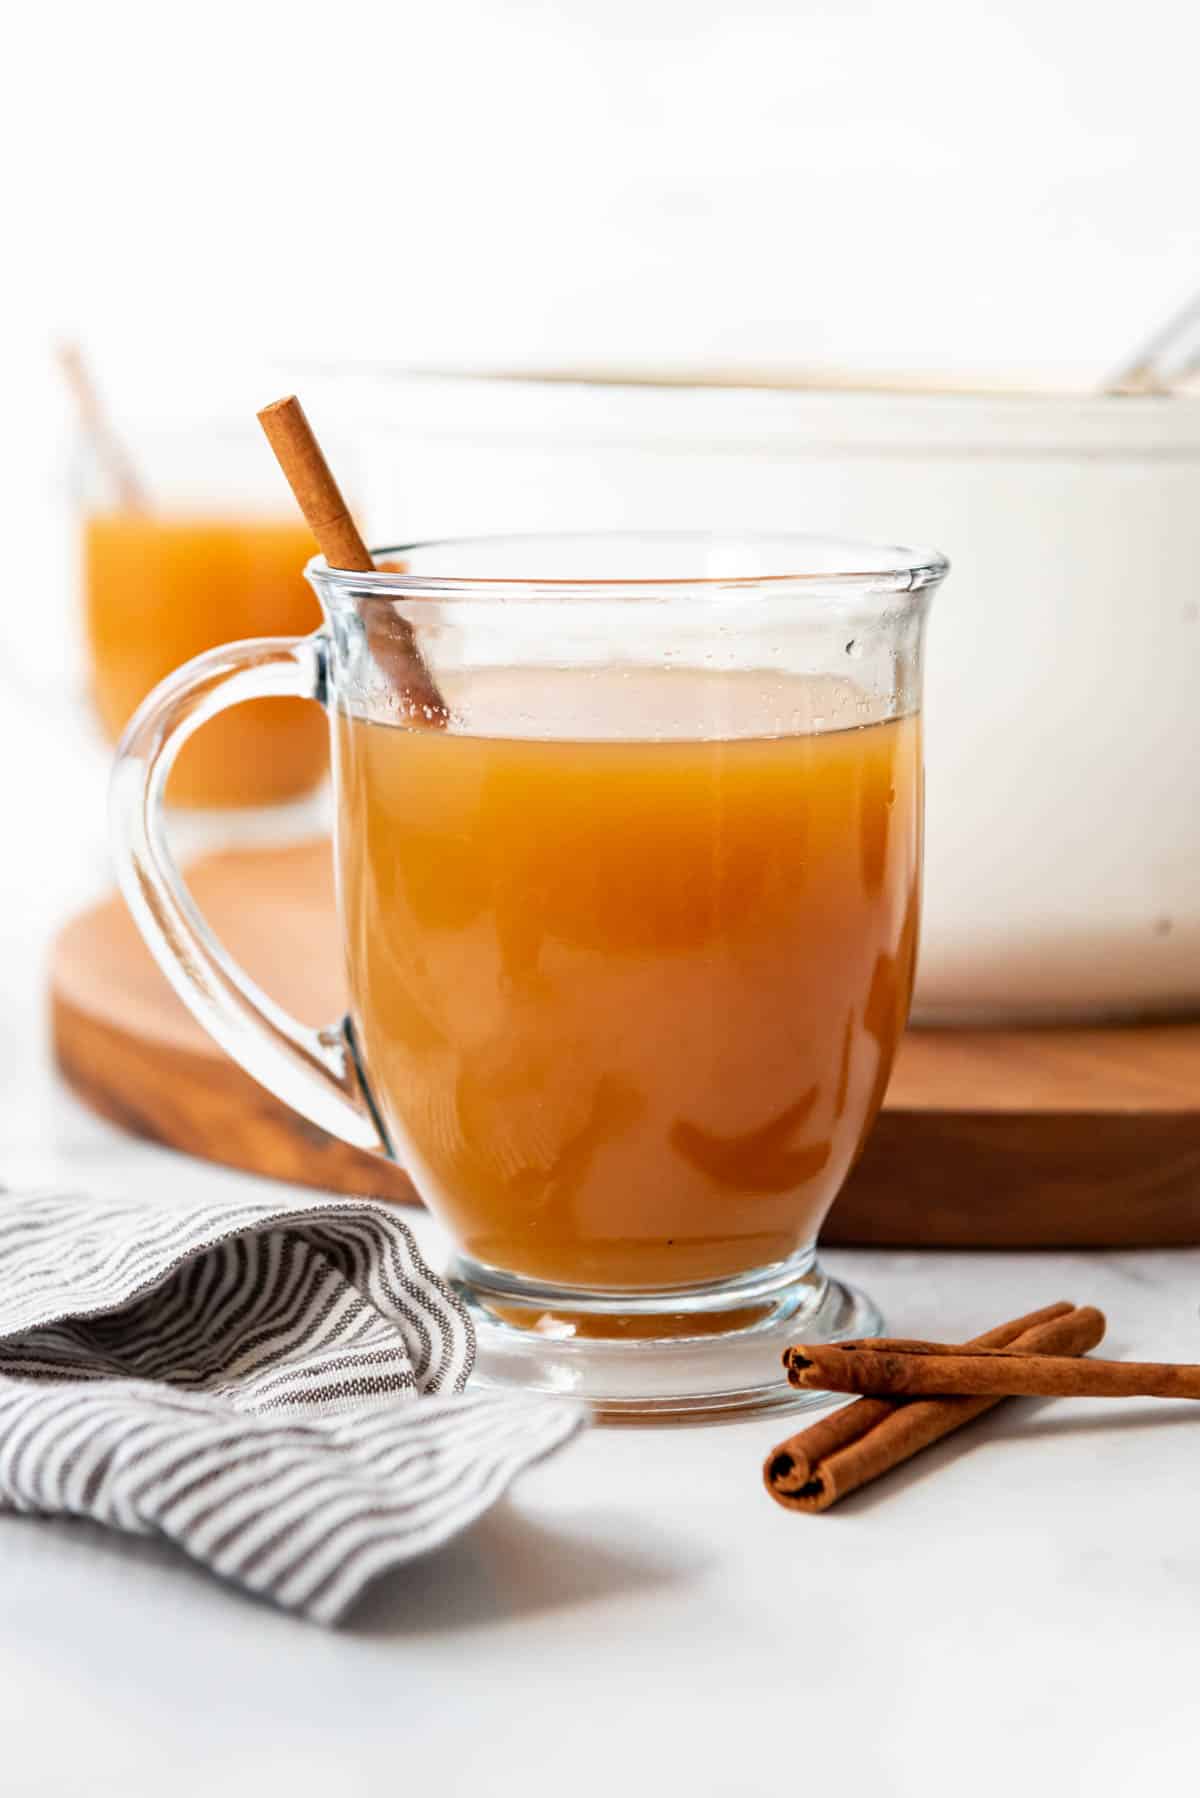 A glass mug filled with wassail and a cinnamon stick.